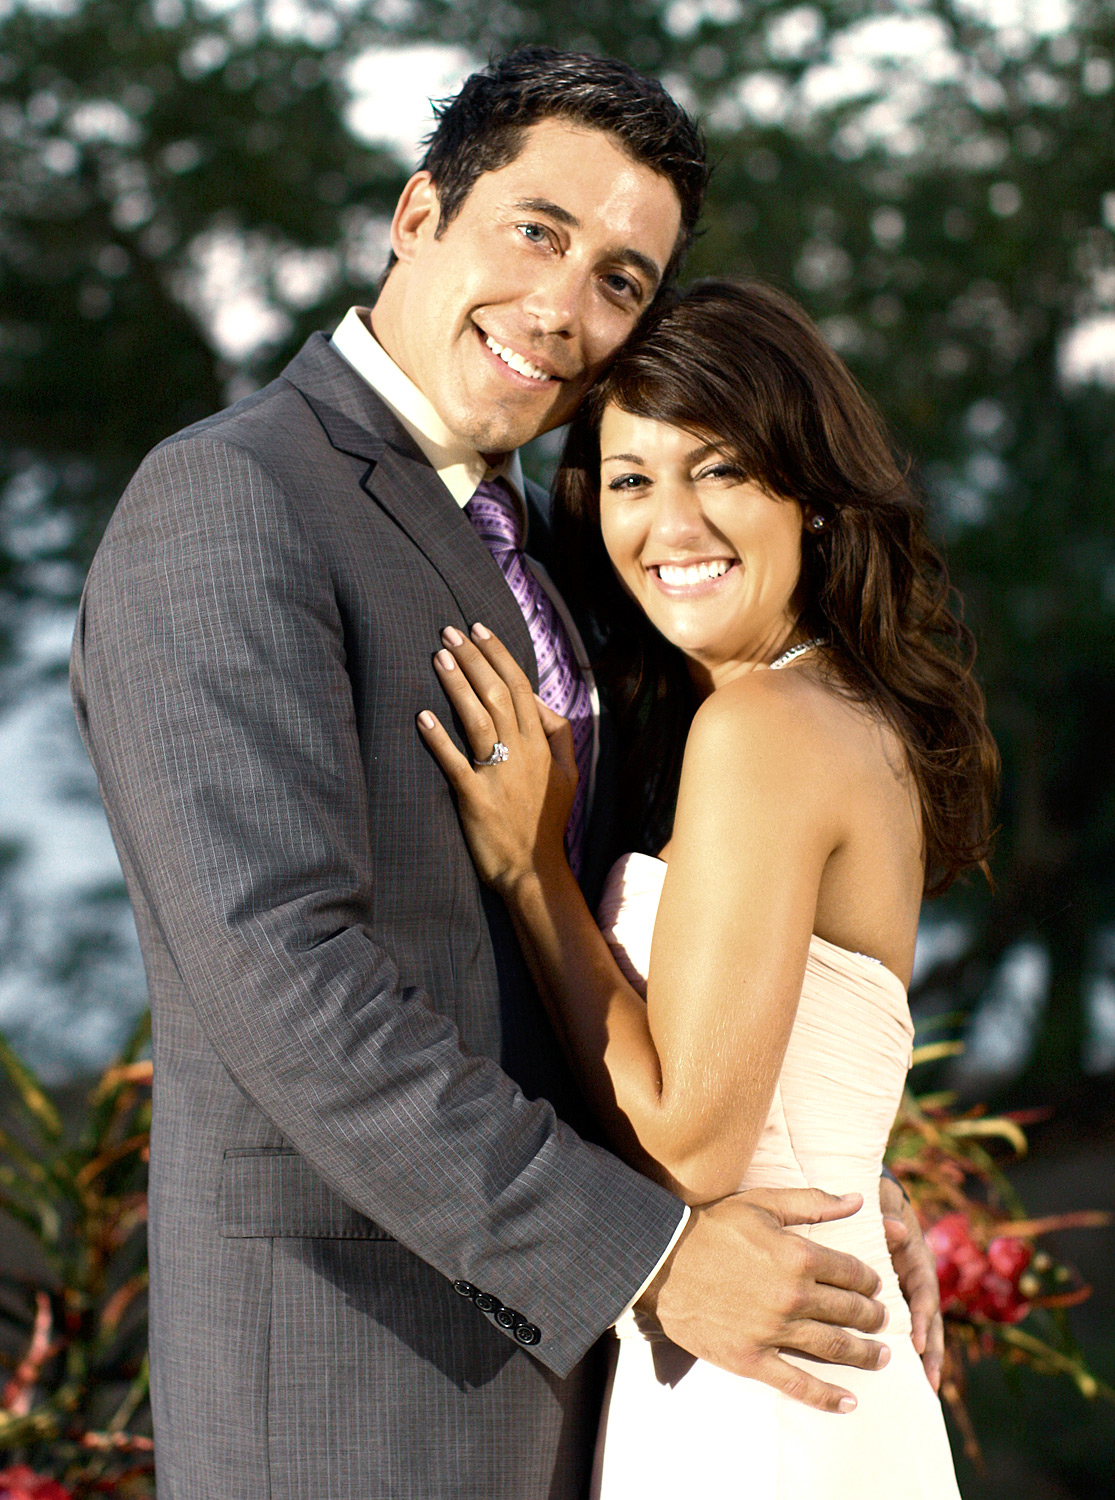 Ed Swiderski Bachelor and Bachelorette Contestants Who Came Back After Being Eliminated